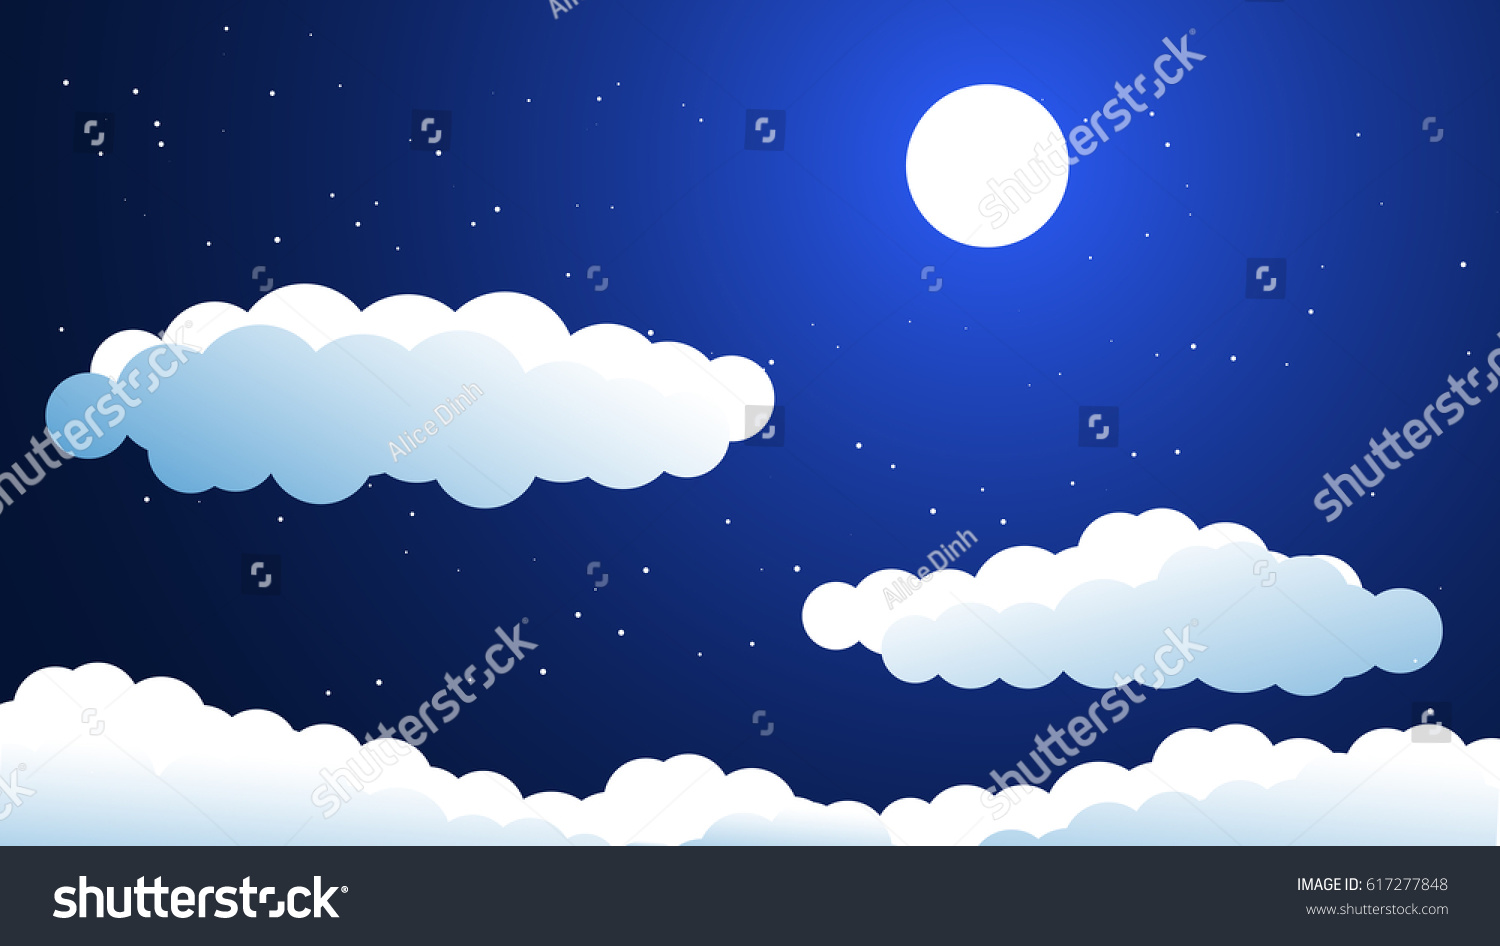 Night Sky Vector Illustration Clouds Moon Stock Vector Royalty Free